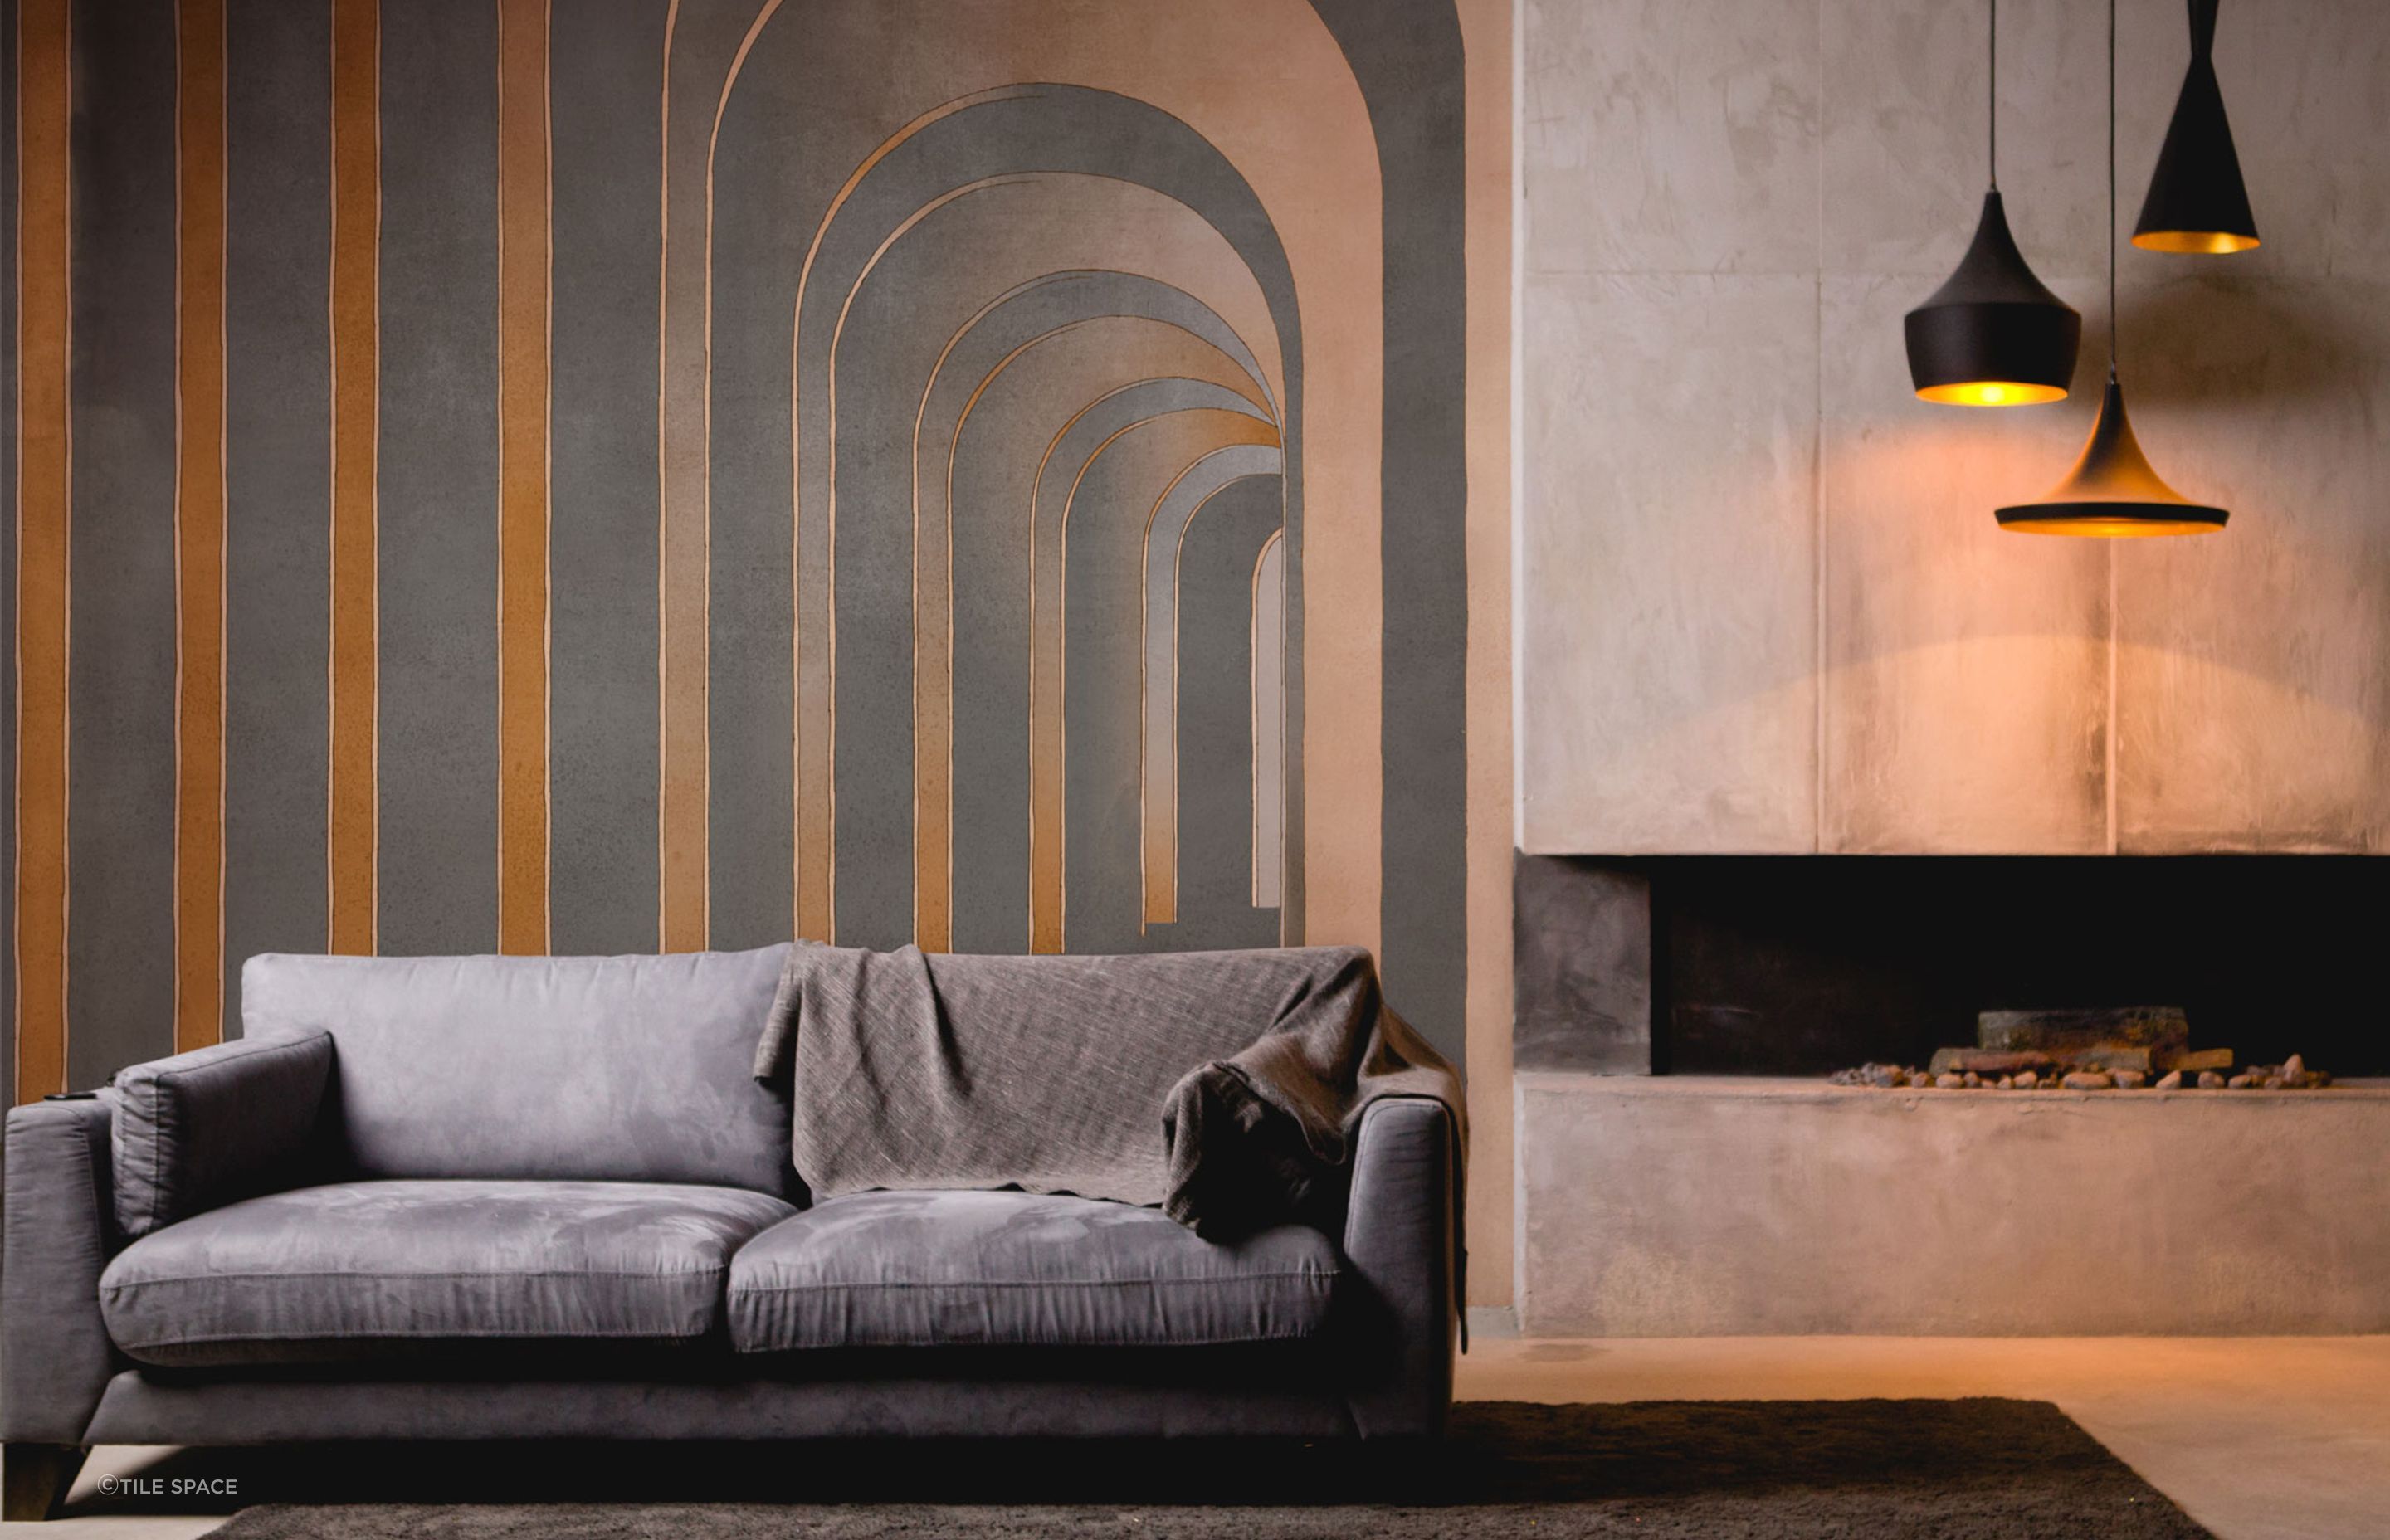 Introduce depth and dynamism to your space with the Technografica Italian Wallpaper collection.